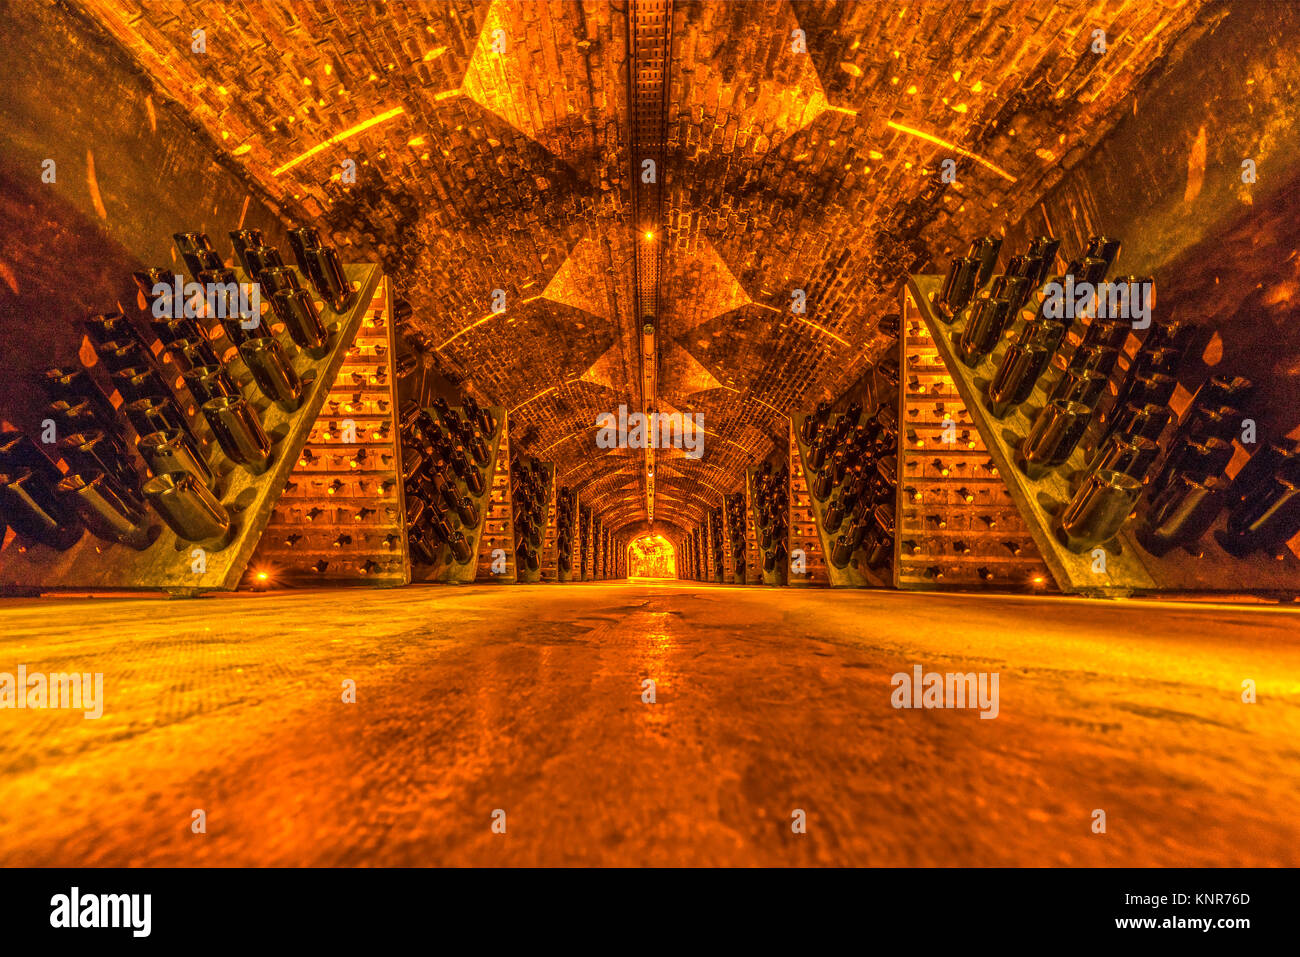 Sparkling wine bottles aging in old cellar, France Stock Photo